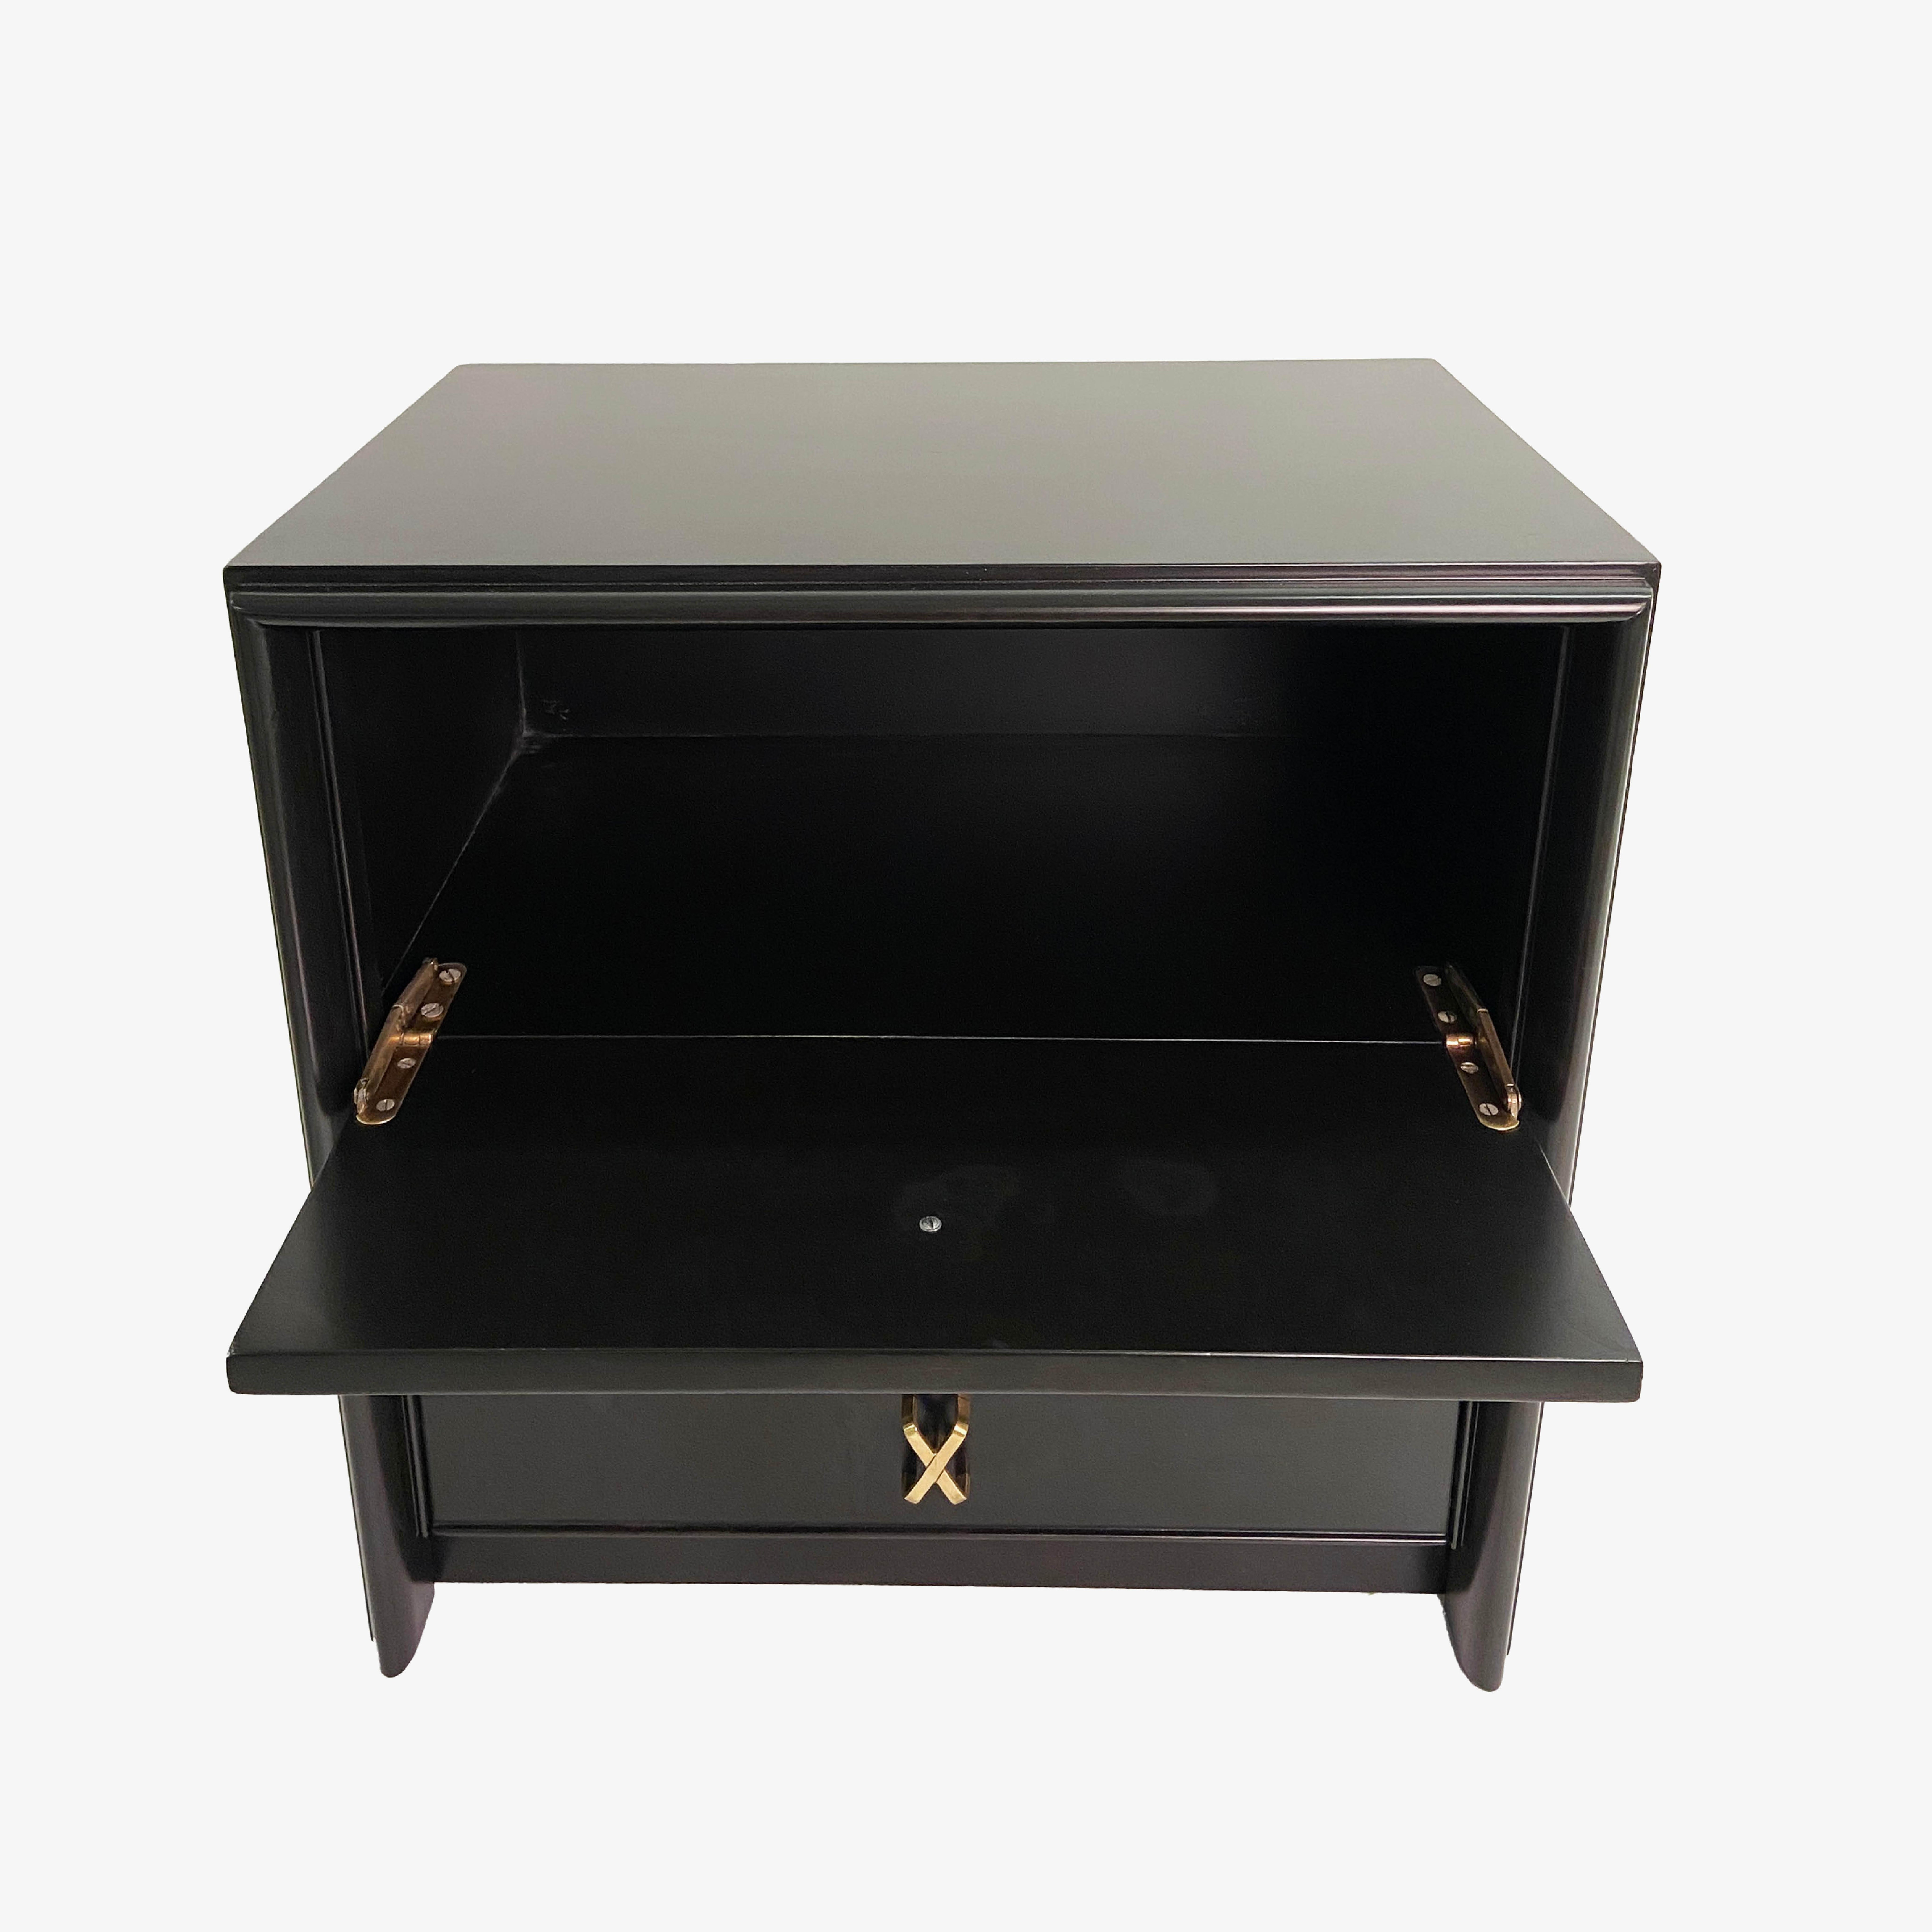 Brass Mid-Century Modern Paul Frankl Nightstands Lacquered in Ebony, Pair For Sale